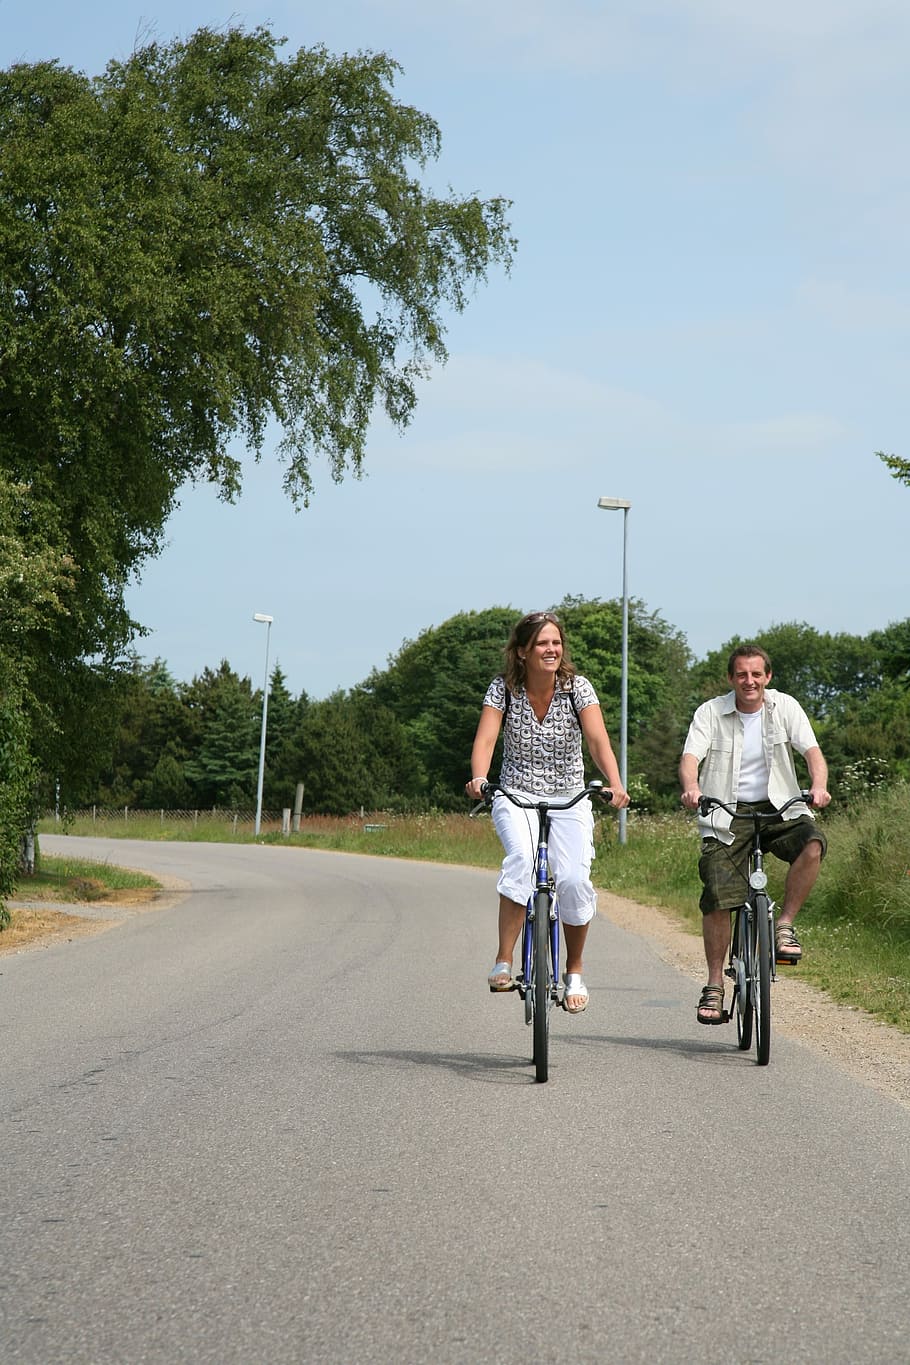 Couple, Cyclists, Bicycles, Ride, summer, road, family, together, woman and man, two people